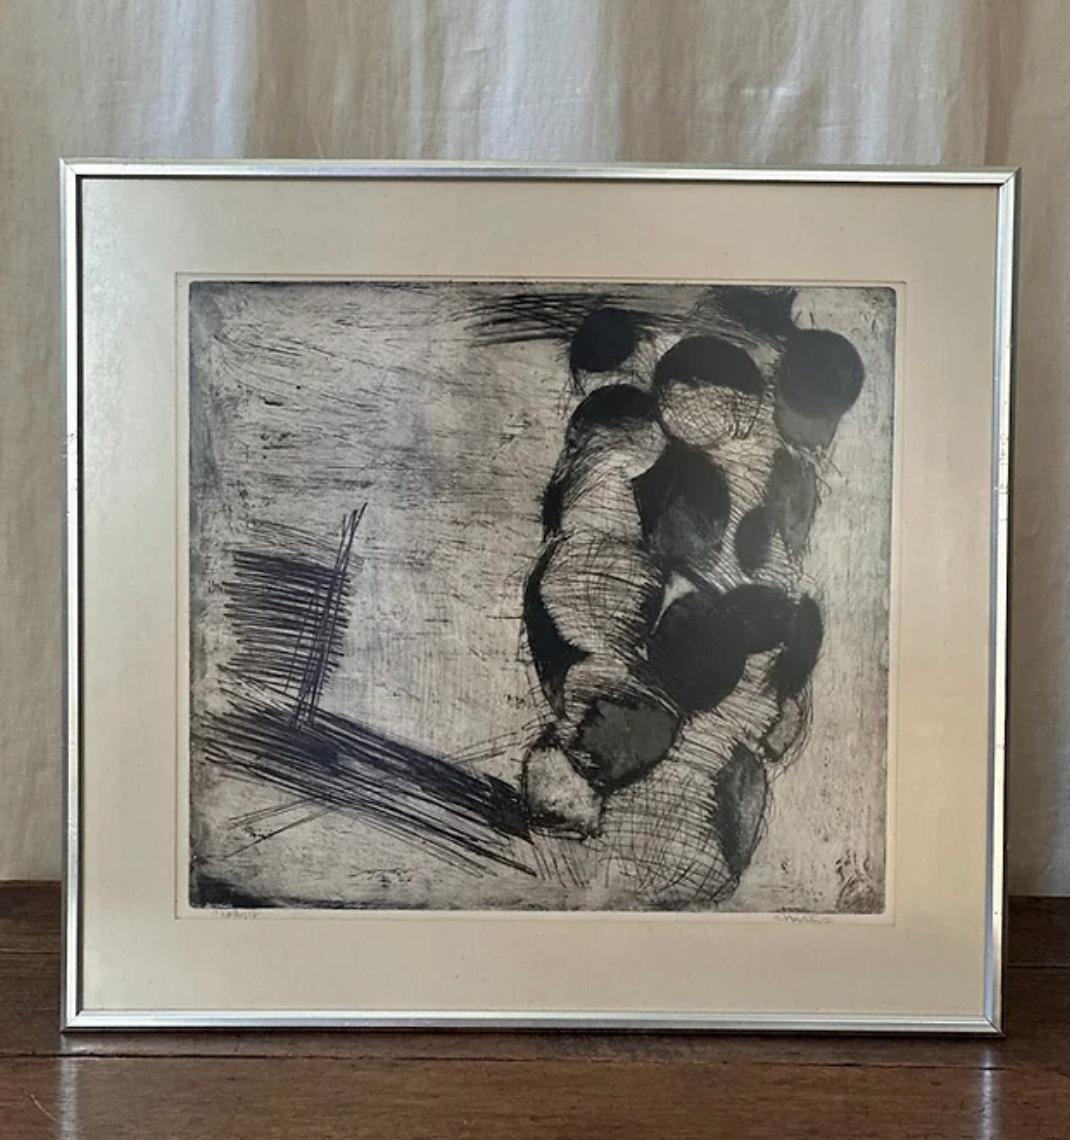 Framed Figure Etching, Signed, Gerhard Nordström.

Gerhard Nordström (15 August 1925 - 13 March 2019, Lund) was a prominent Swedish painter and graphic artist. 

Measurements:
44.5 cm x 50 cm

There are a few marks to the frame, please see